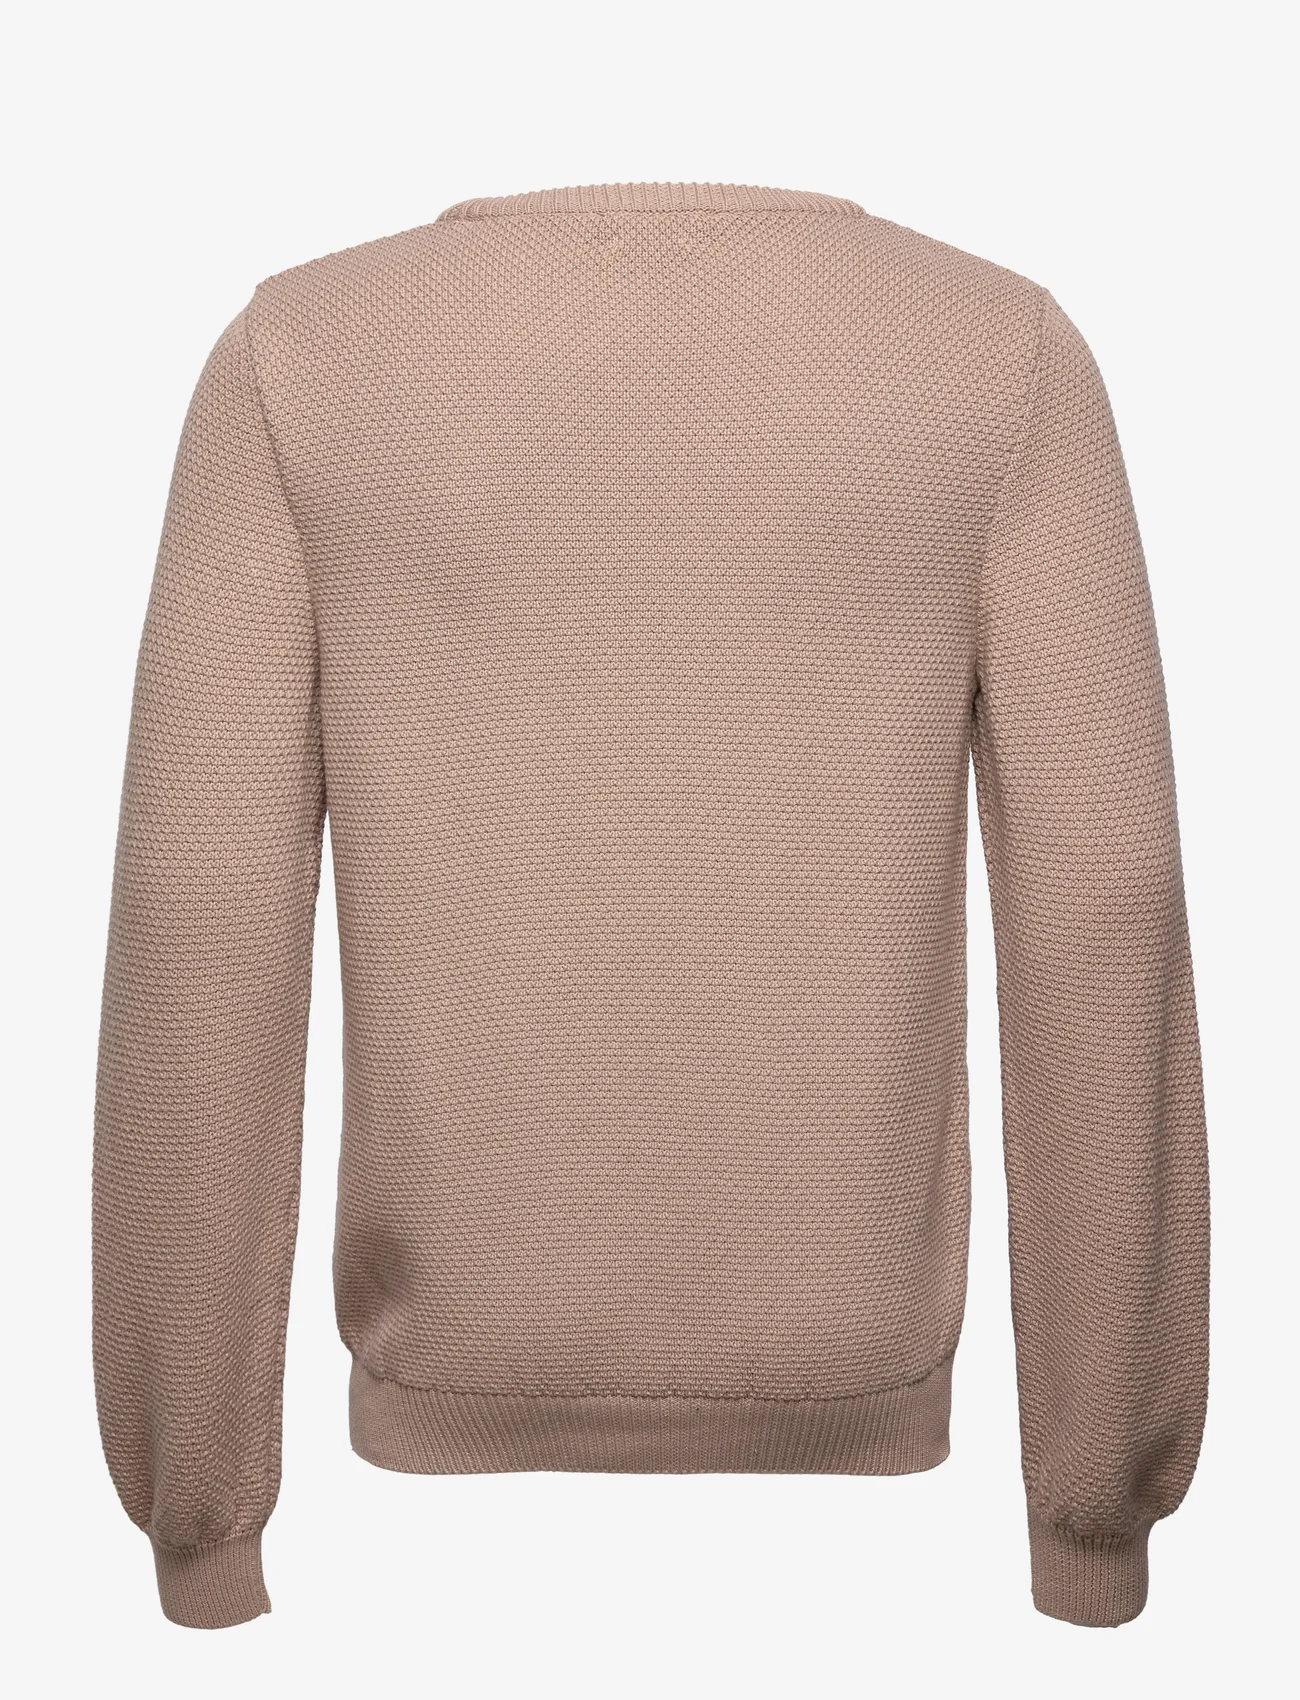 By Garment Makers - The Organic Waffle knit - basic gebreide truien - light taupe - 1